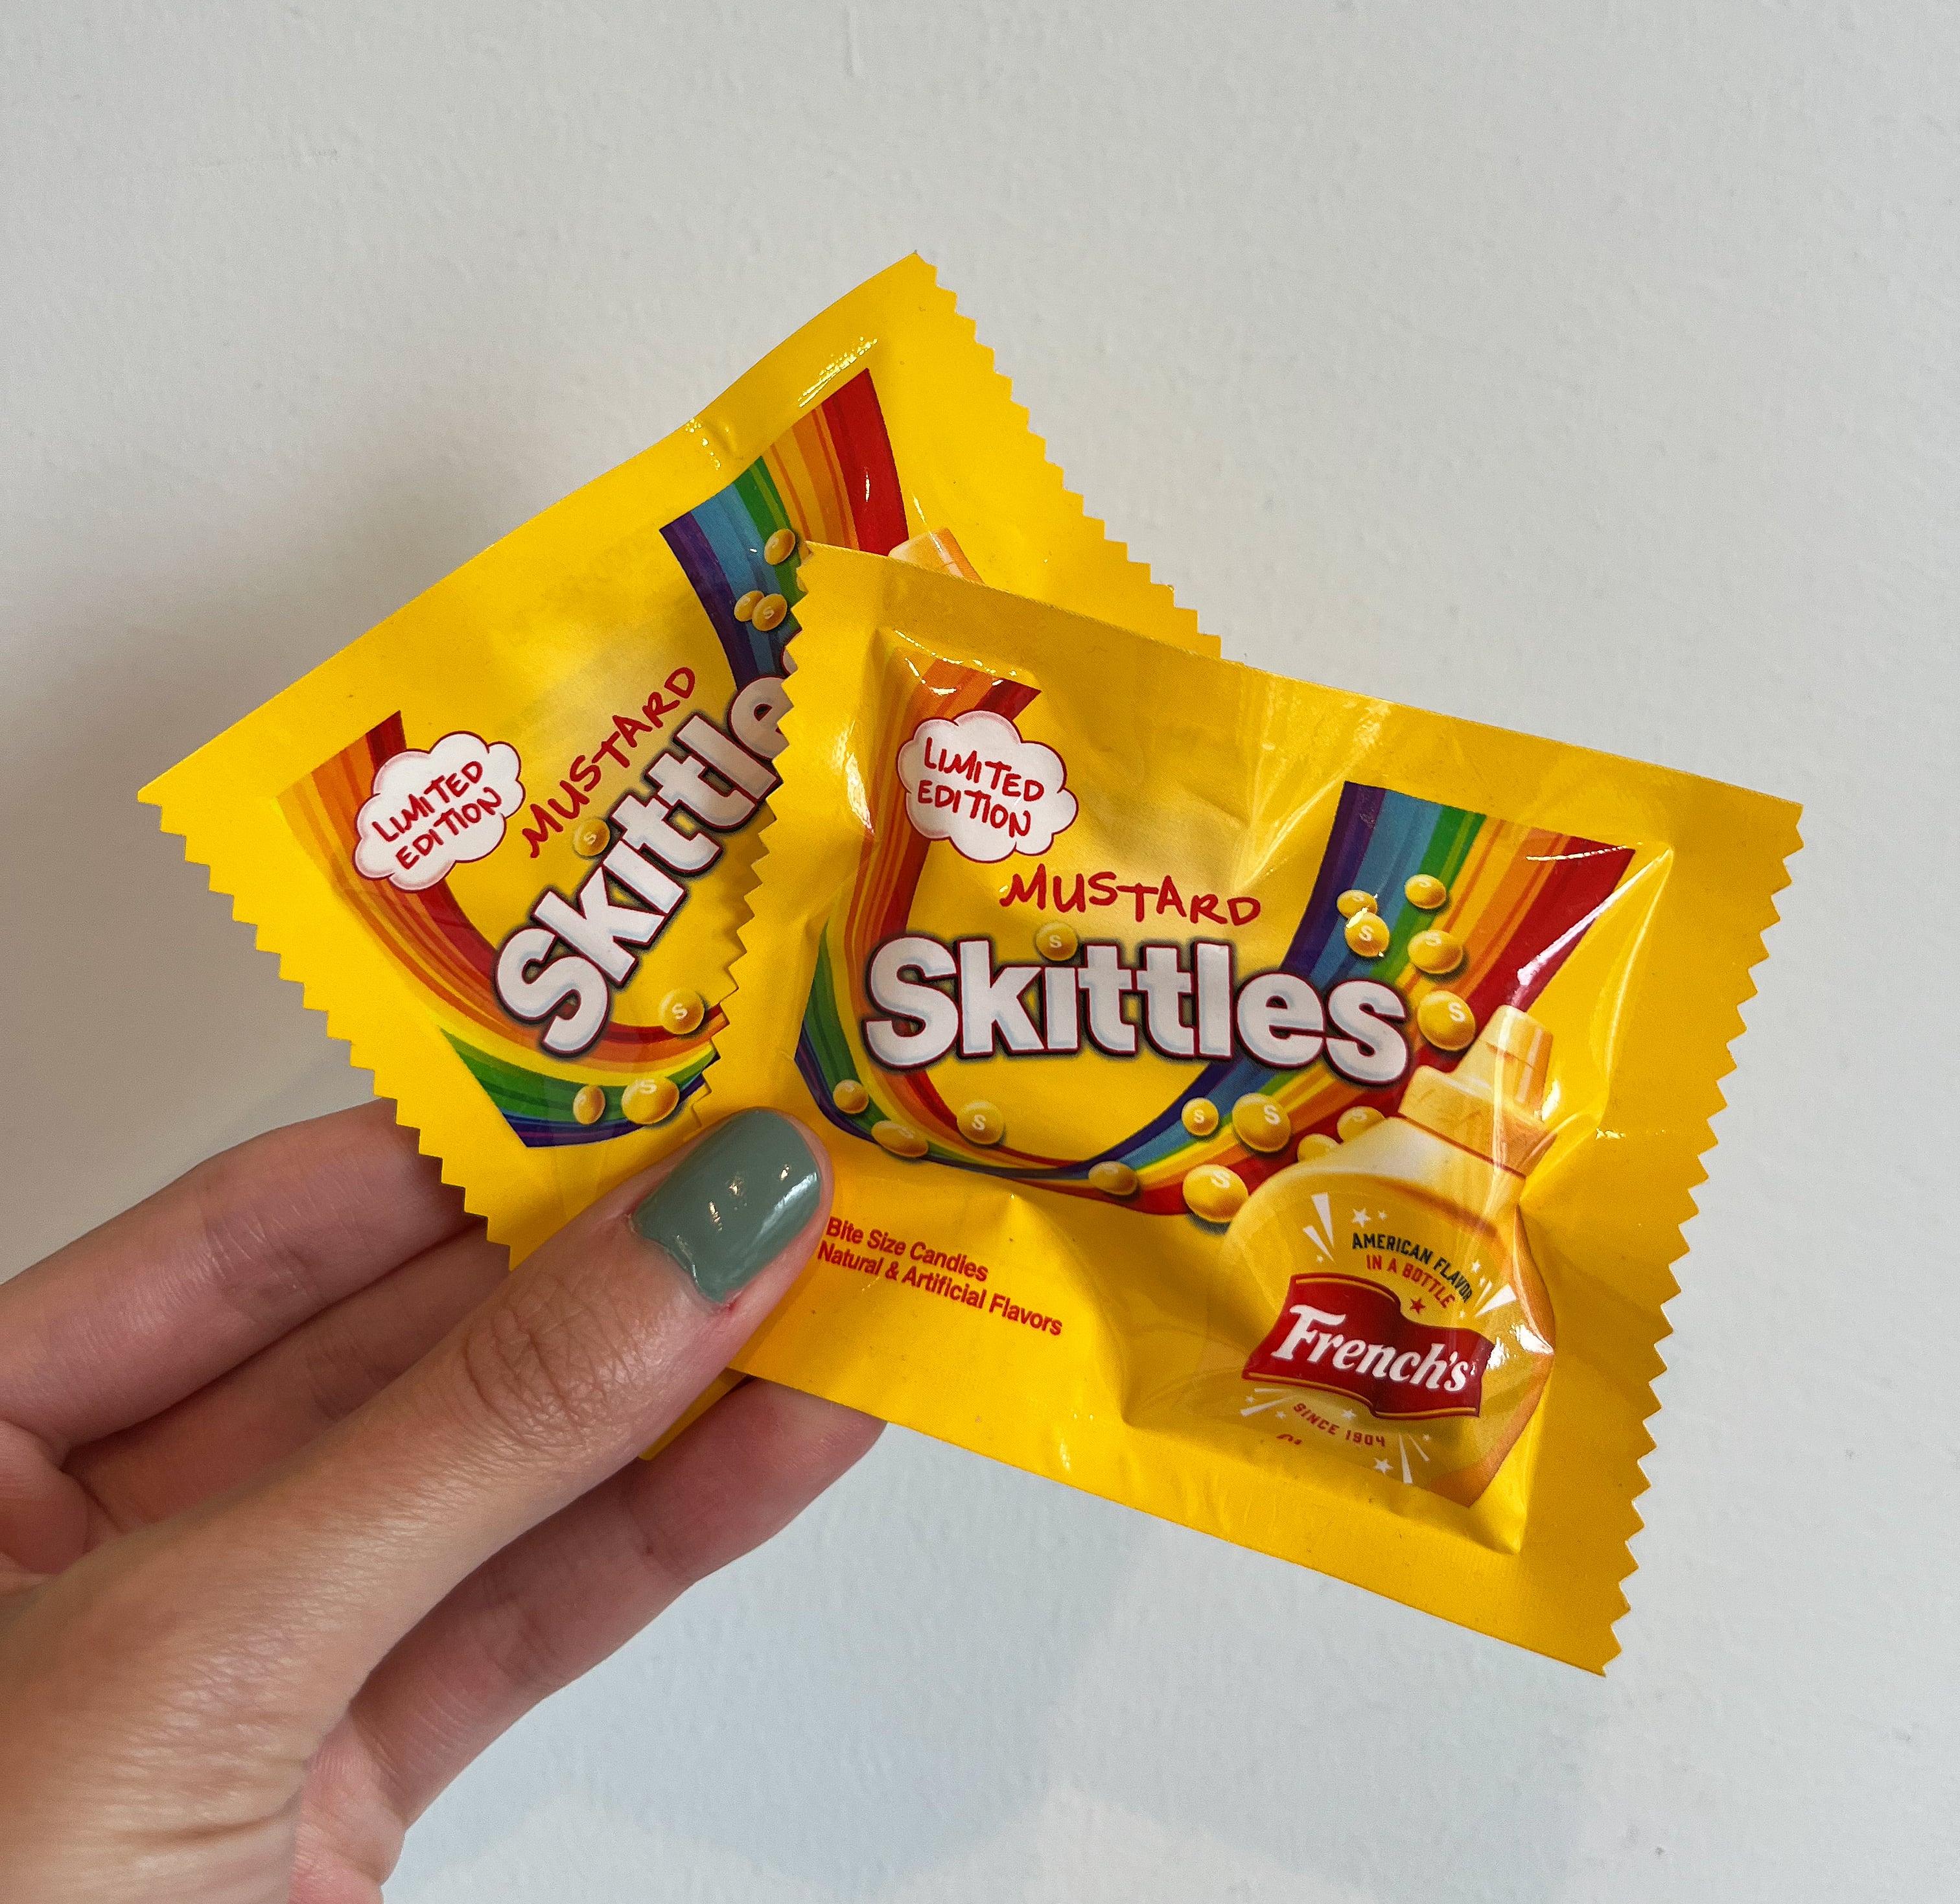 I Tried French's Mustard-Flavored Skittles: Candy Review